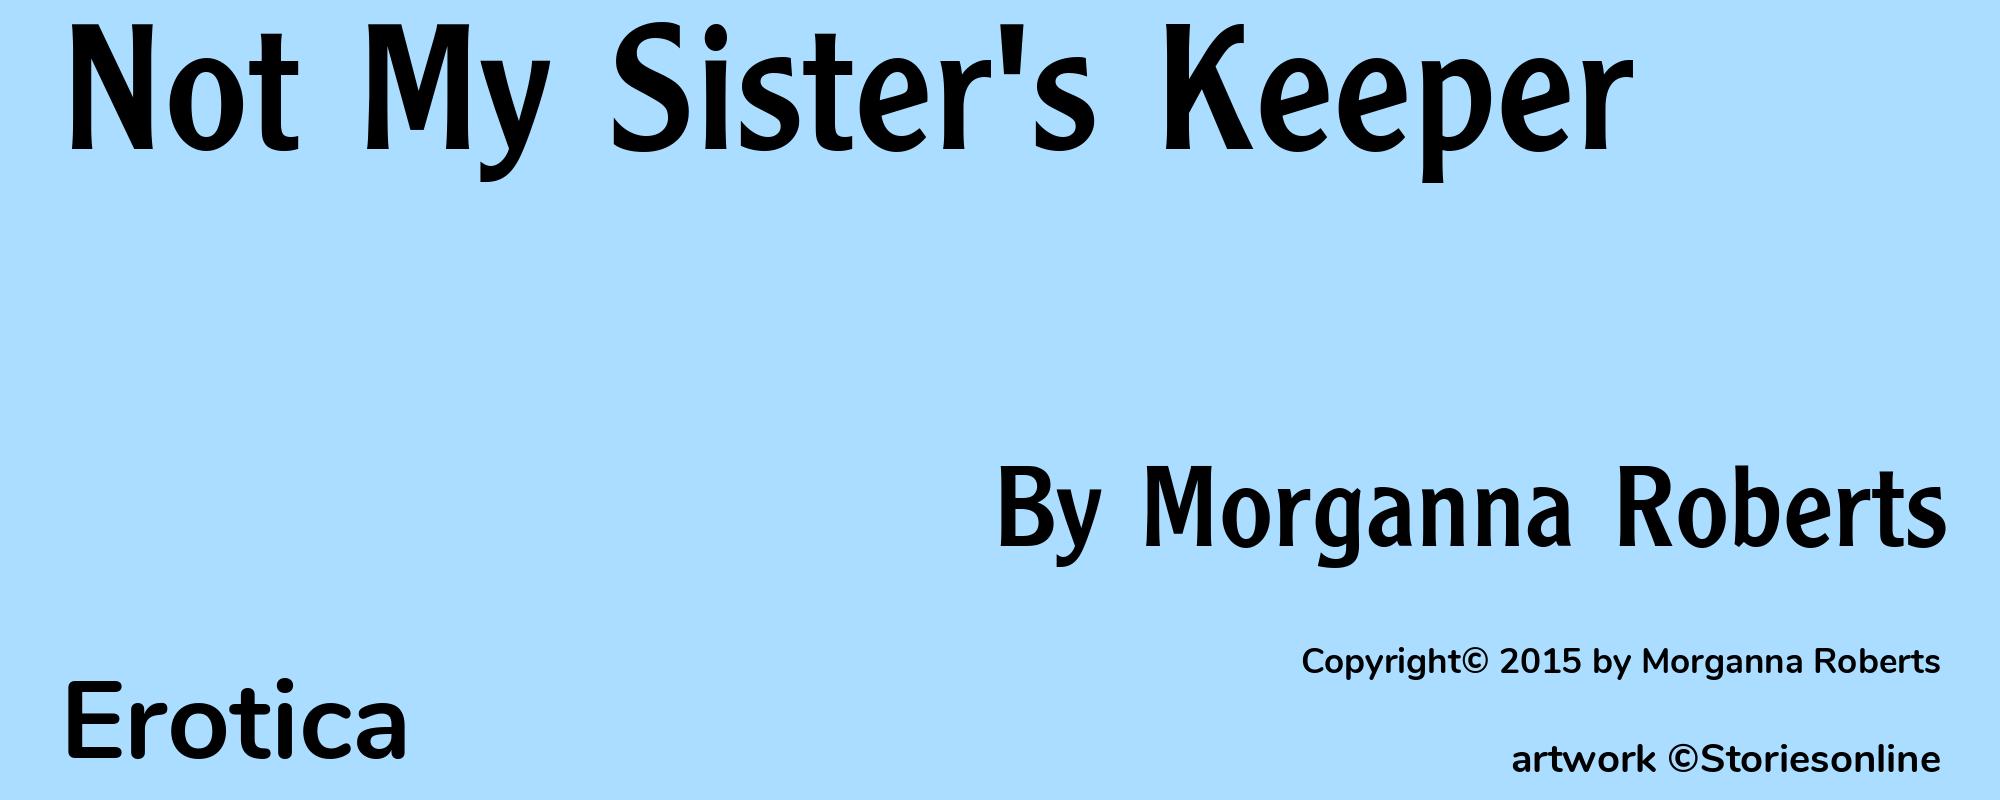 Not My Sister's Keeper - Cover